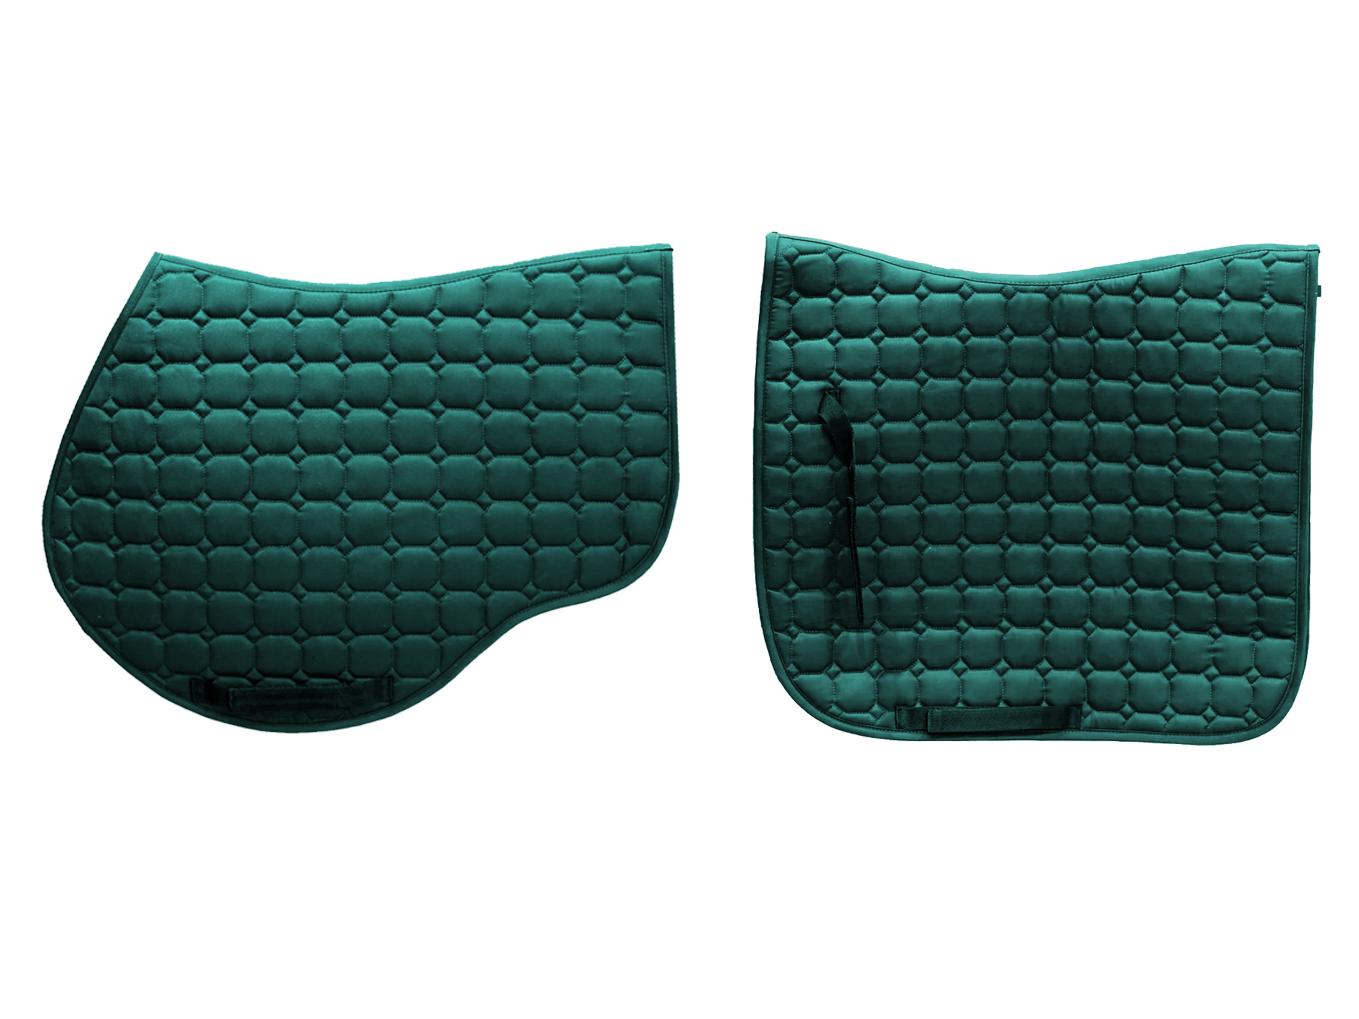 Quilted Saddle Pad - Emerald - Design your own!